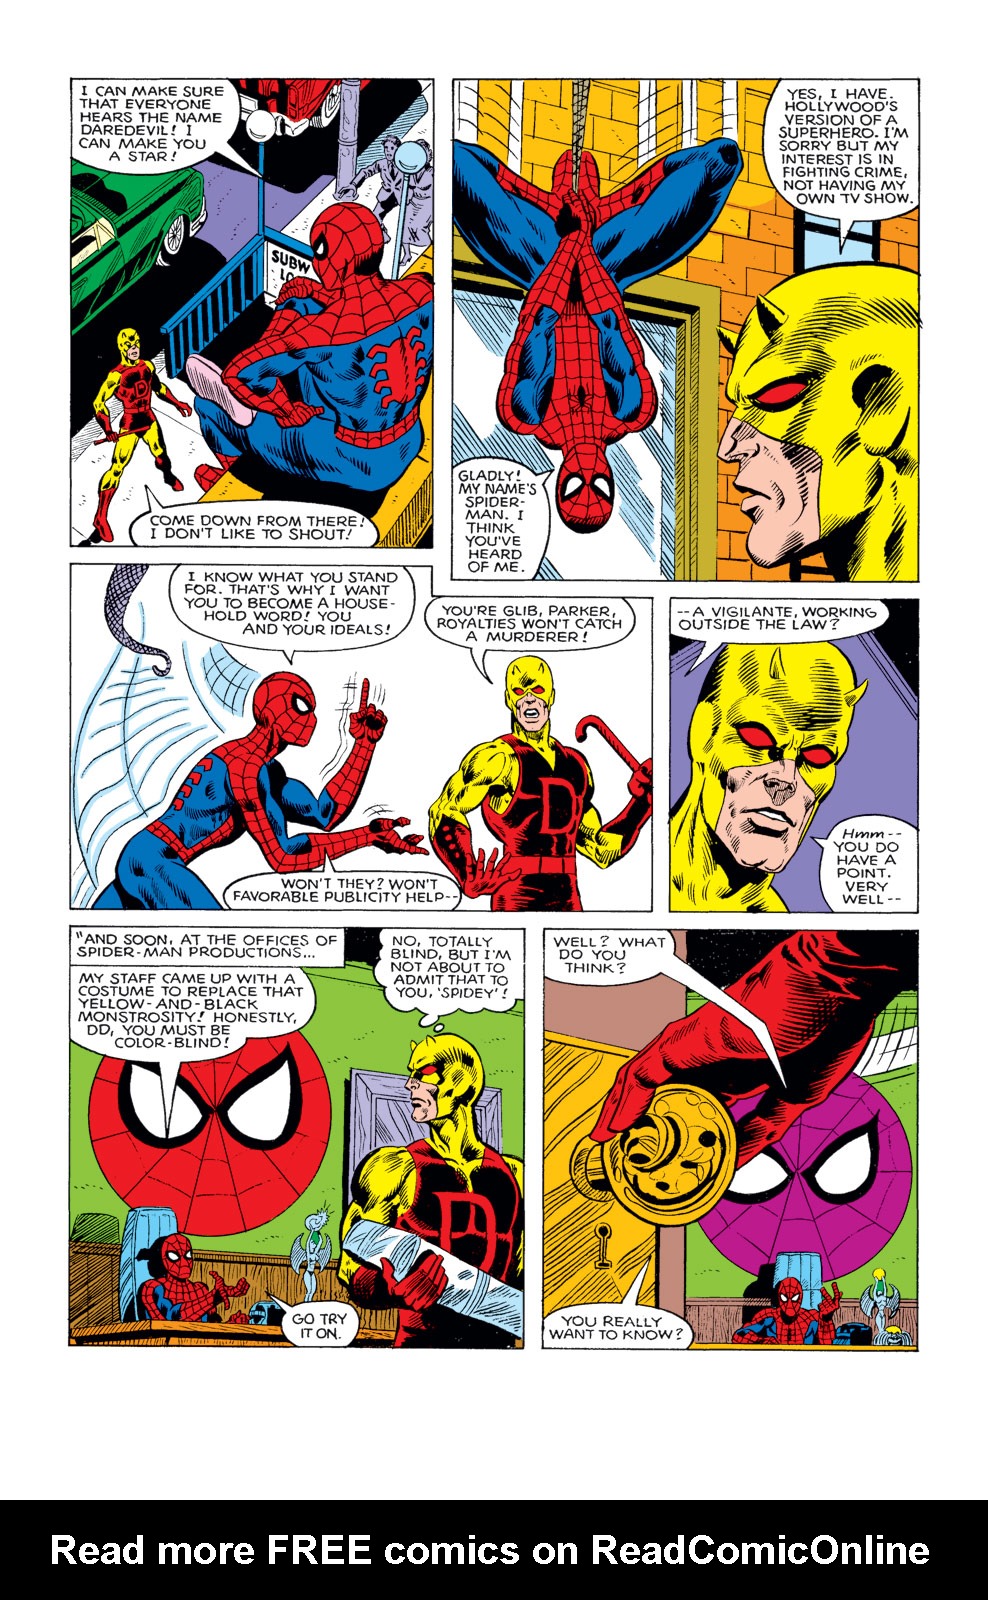 What If? (1977) issue 19 - Spider-Man had never become a crimefighter - Page 17